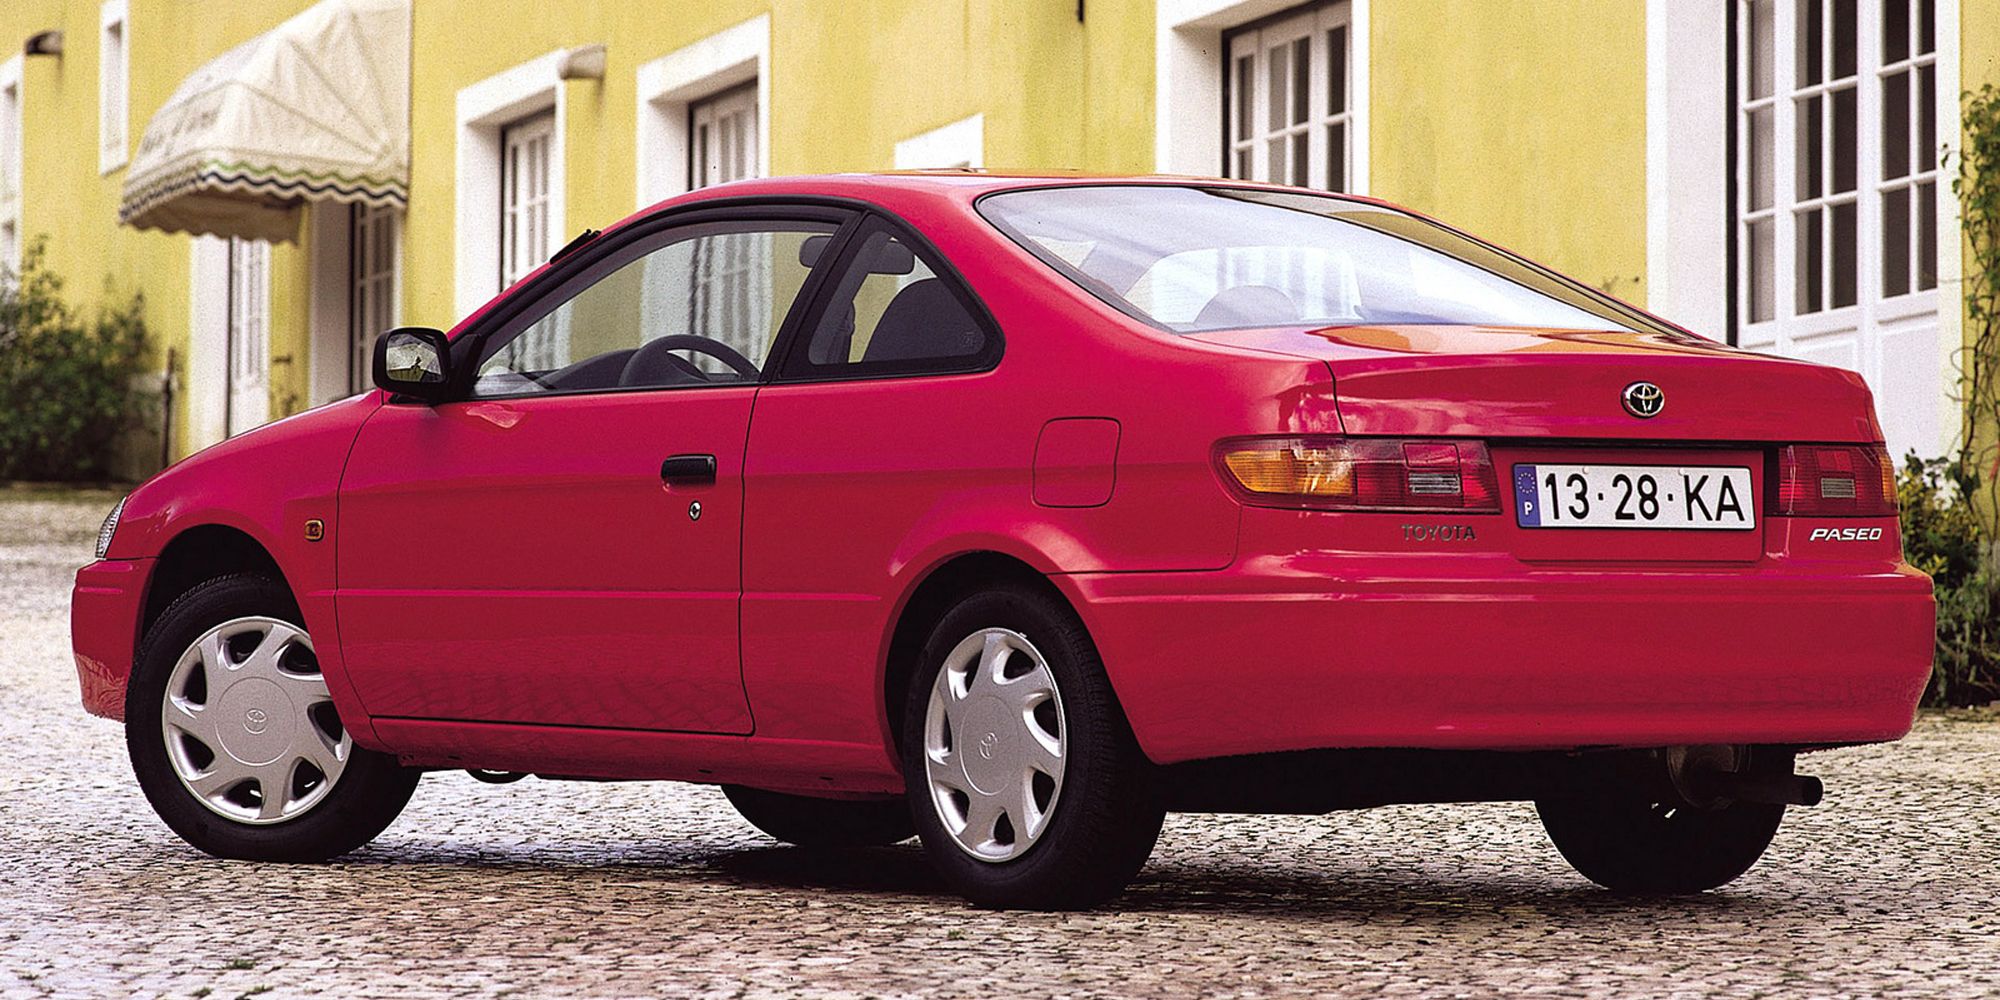  Toyota Paseo Red - Rear